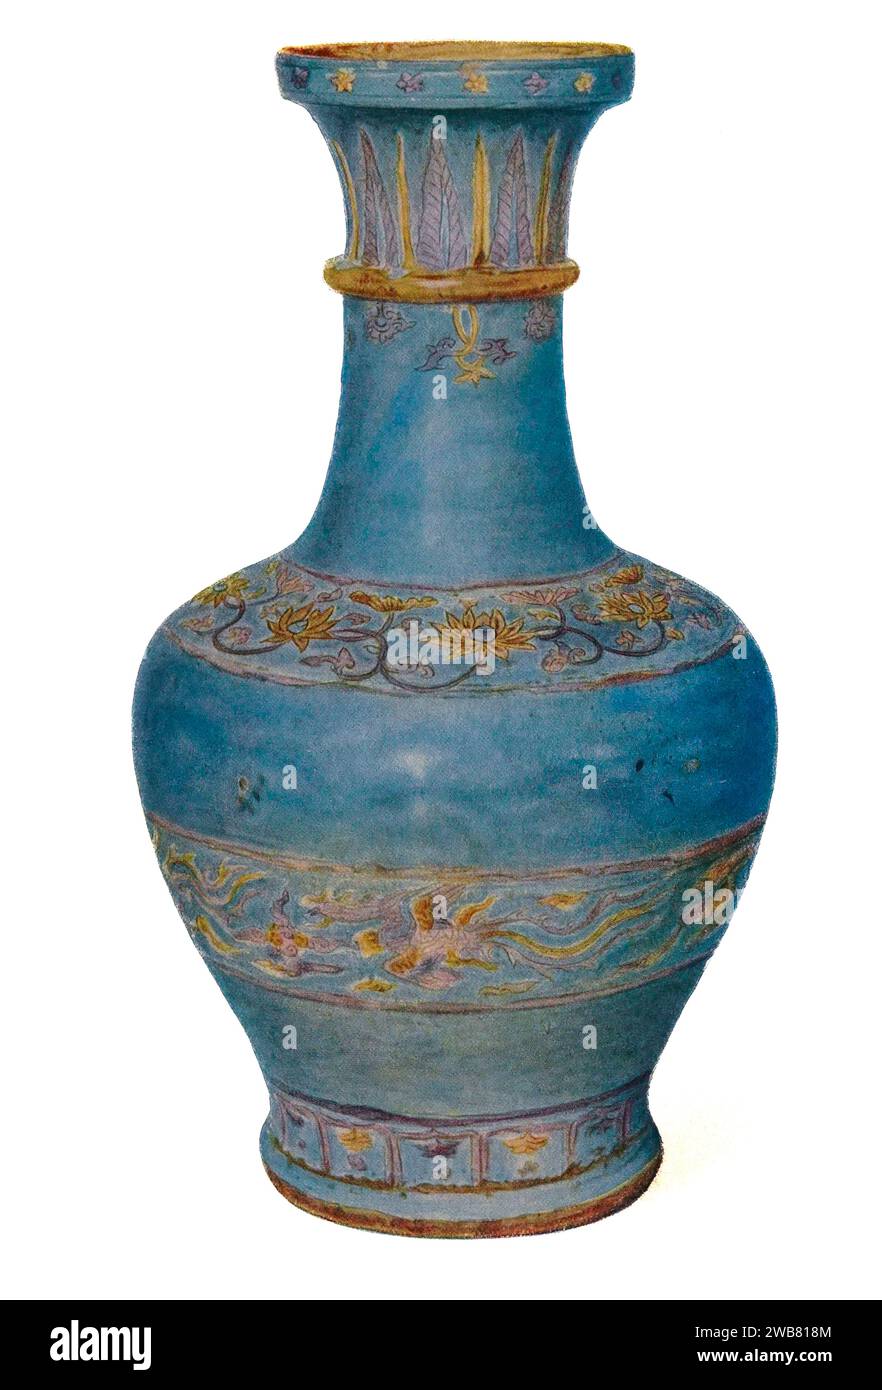 Vase of porcelain with coloured glazes and belts of engraved designs. Early Ming dynasty. H. 558mm from Chinese art : one hundred plates in colour reproducing pottery & porcelain of all periods, jades, lacquer, paintings, bronzes, furniture, etc., etc. by   Hobson, R. L. (Robert Lockhart), 1872-1941 Publication date 1927 Publisher New York : The Macmillan Company Stock Photo